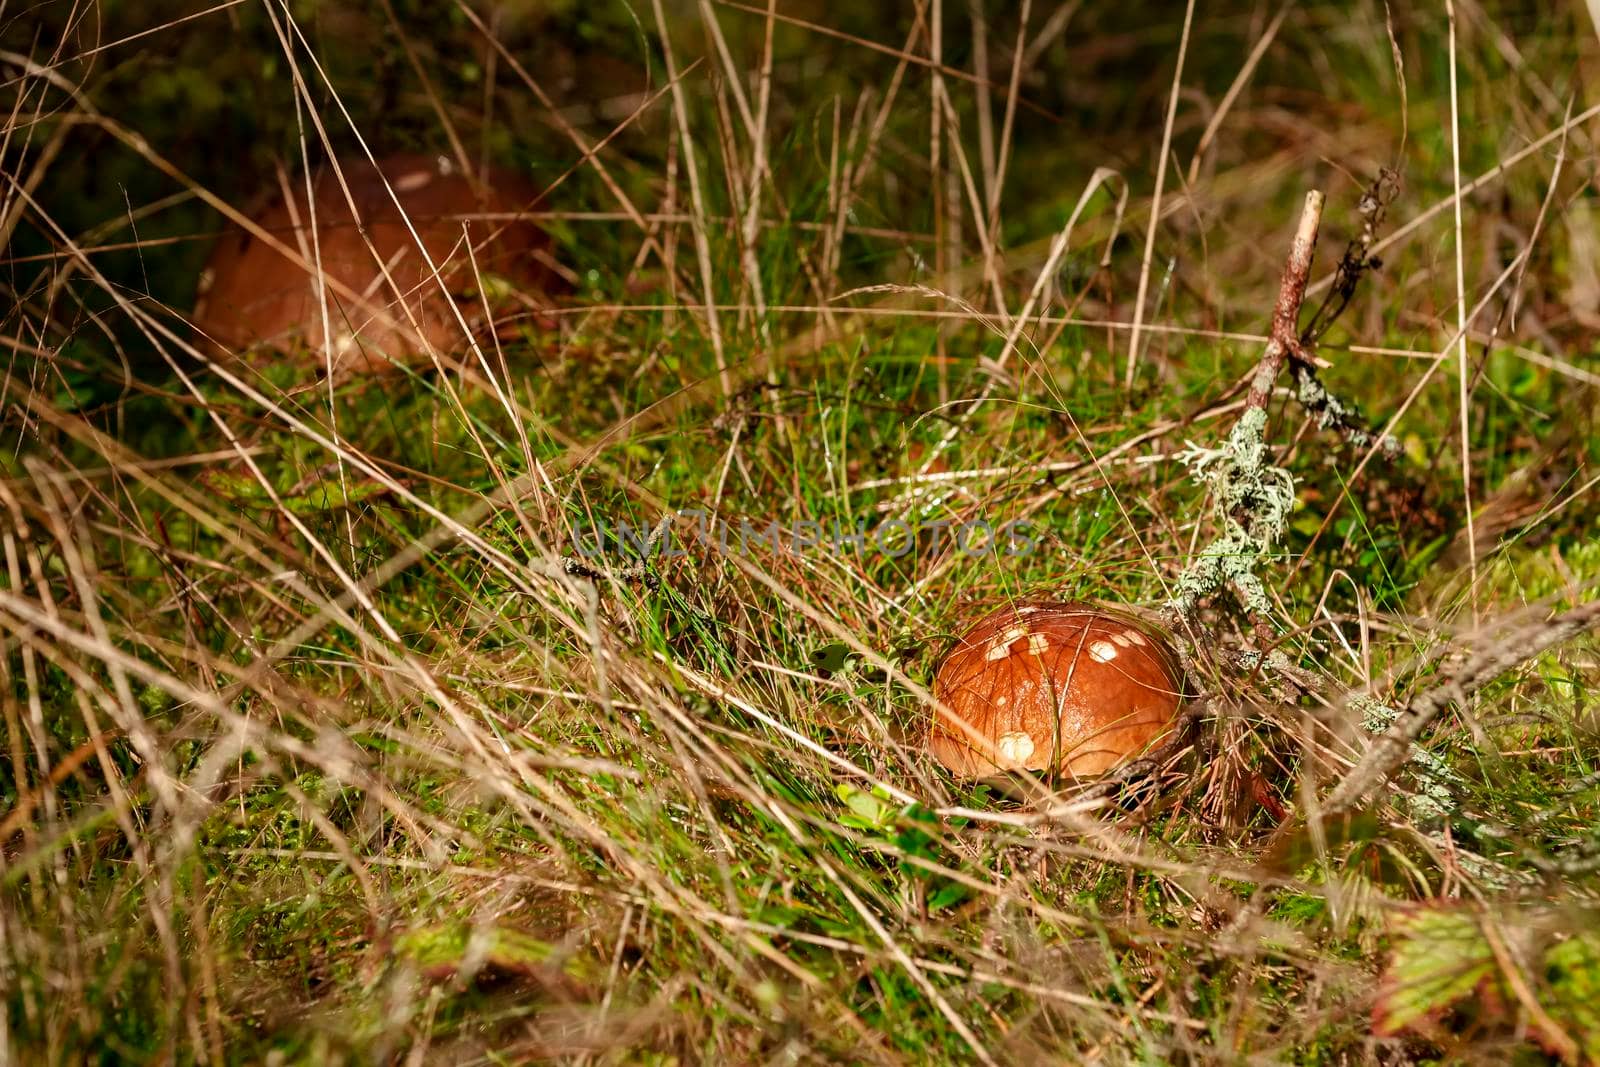 Autumn in the forest. Mushroom in the forest